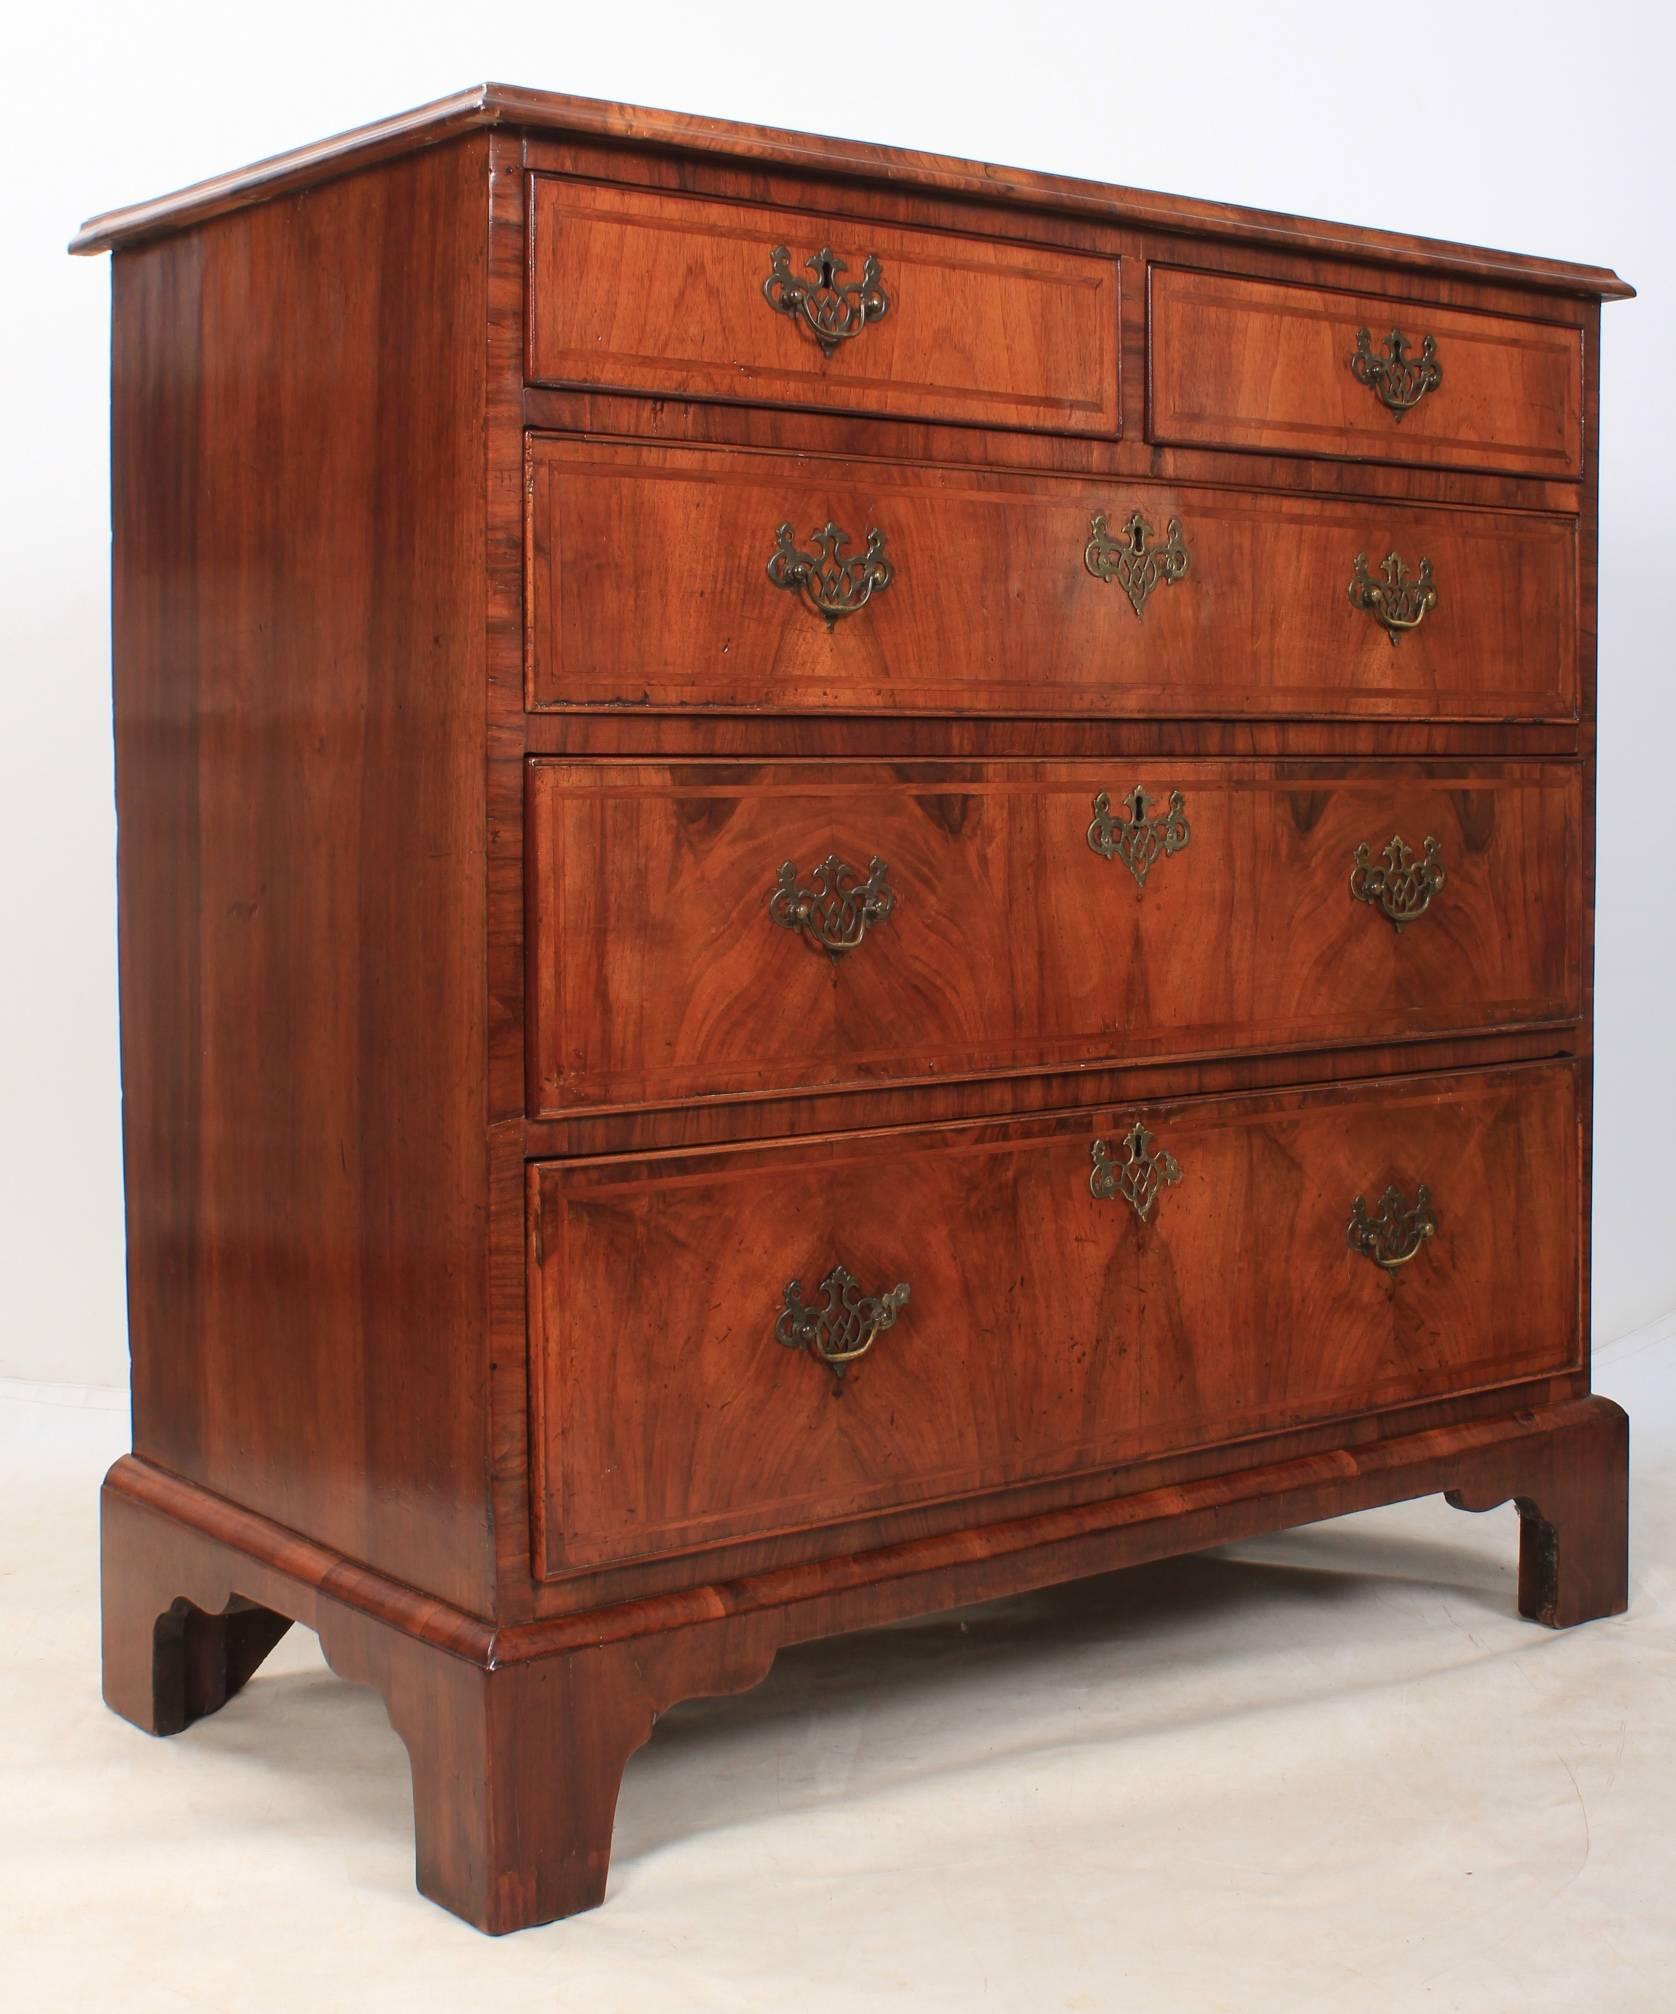 Queen Anne Walnut Chest of Drawers In Excellent Condition For Sale In Detling, GB